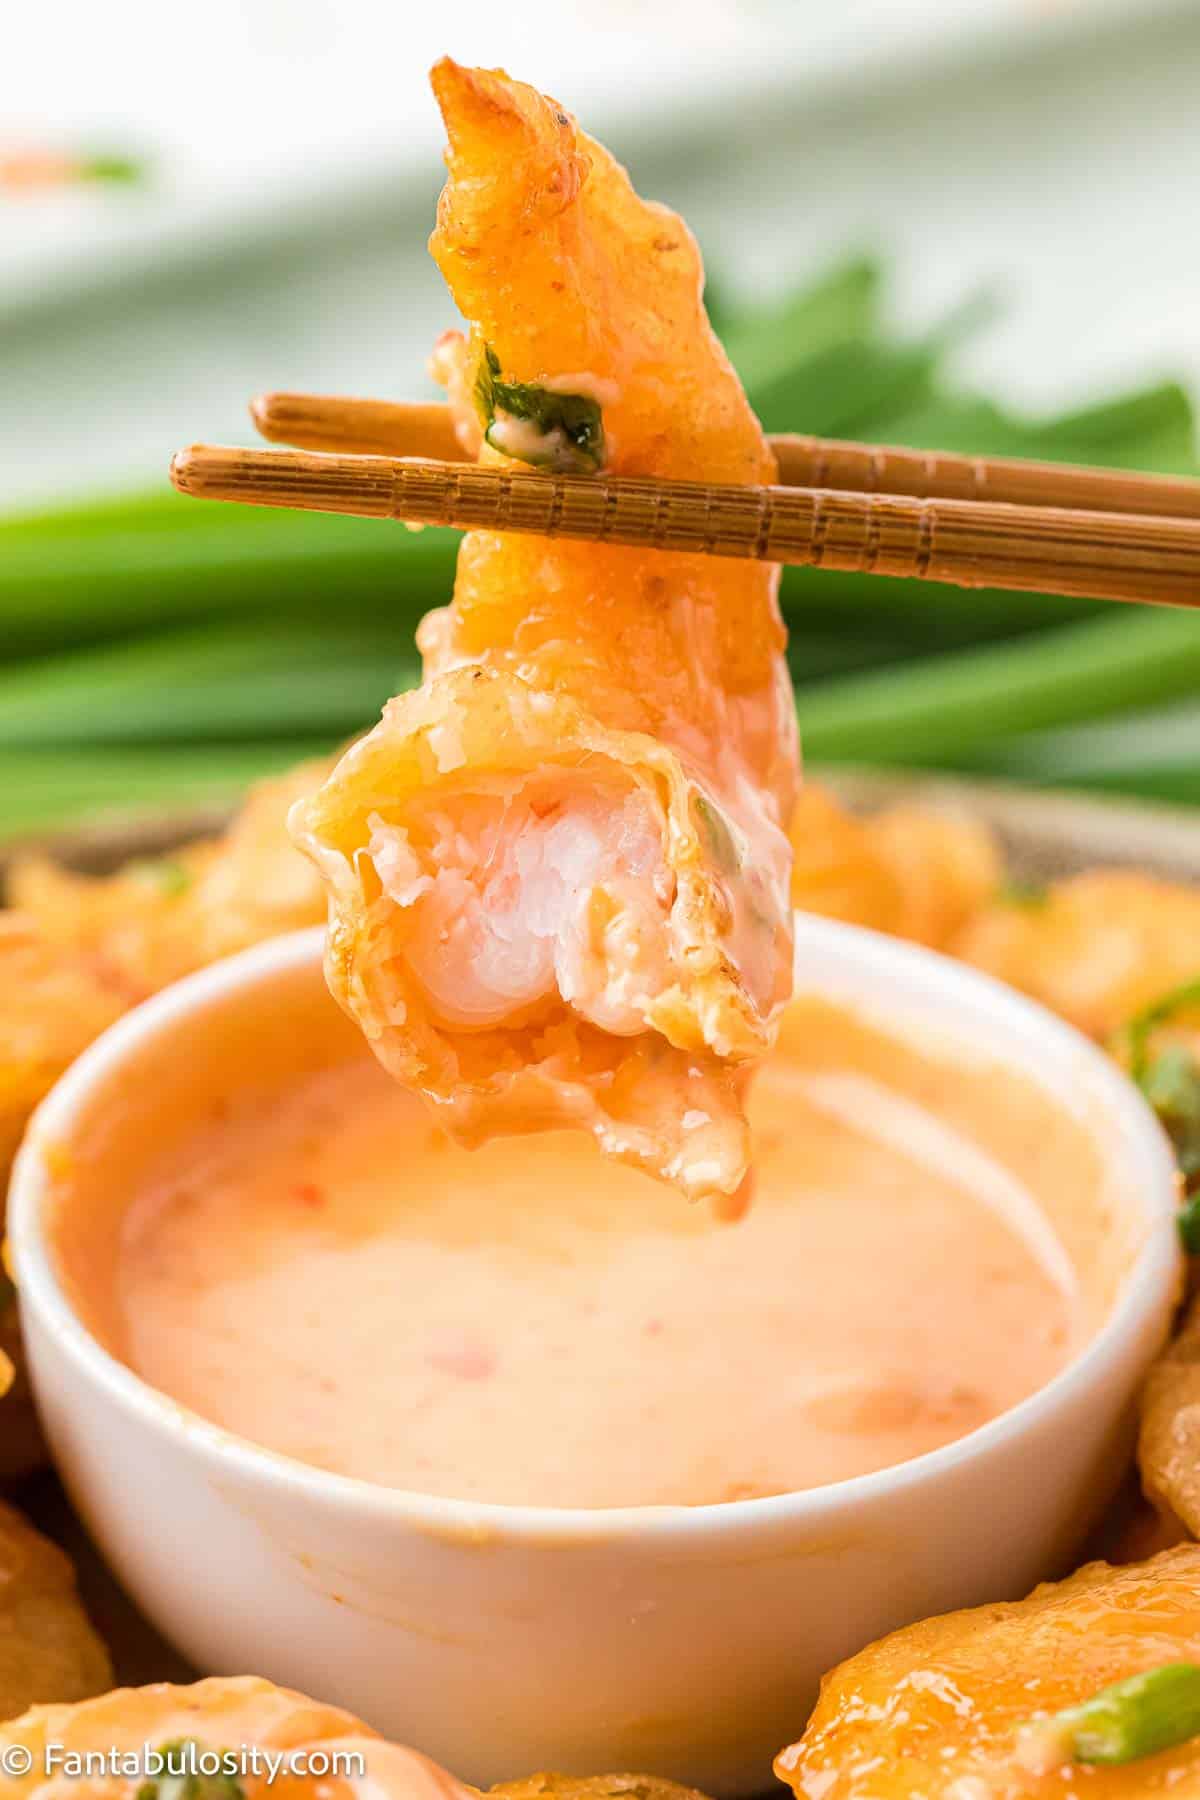 Boom boom shrimp with a bite taken out of it, being dipped in more sauce.